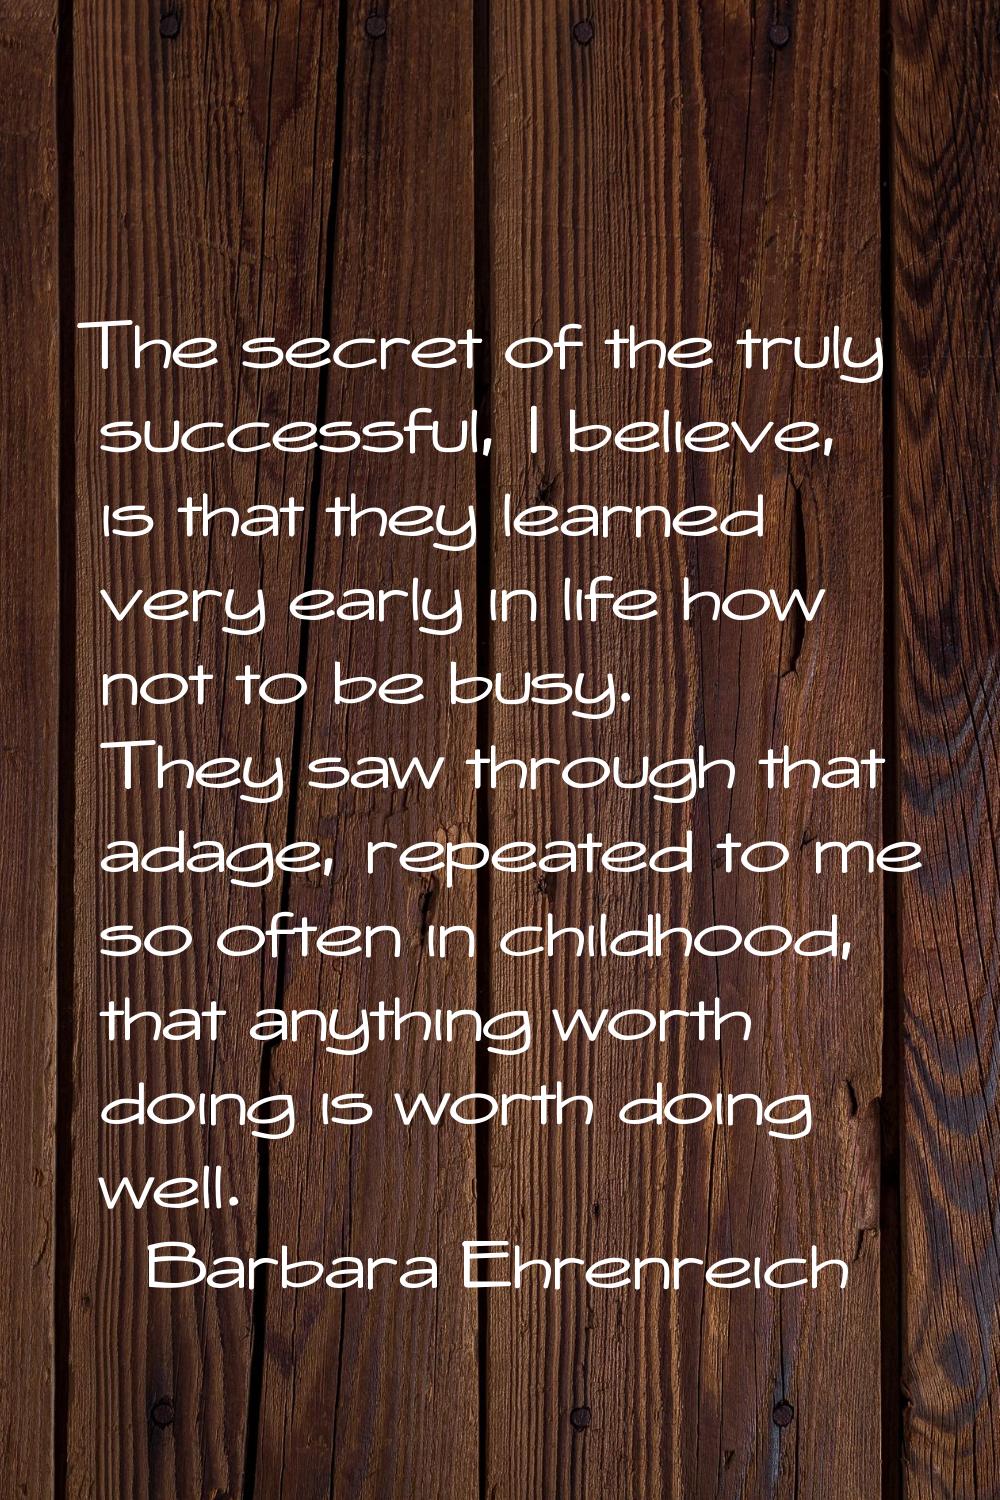 The secret of the truly successful, I believe, is that they learned very early in life how not to b